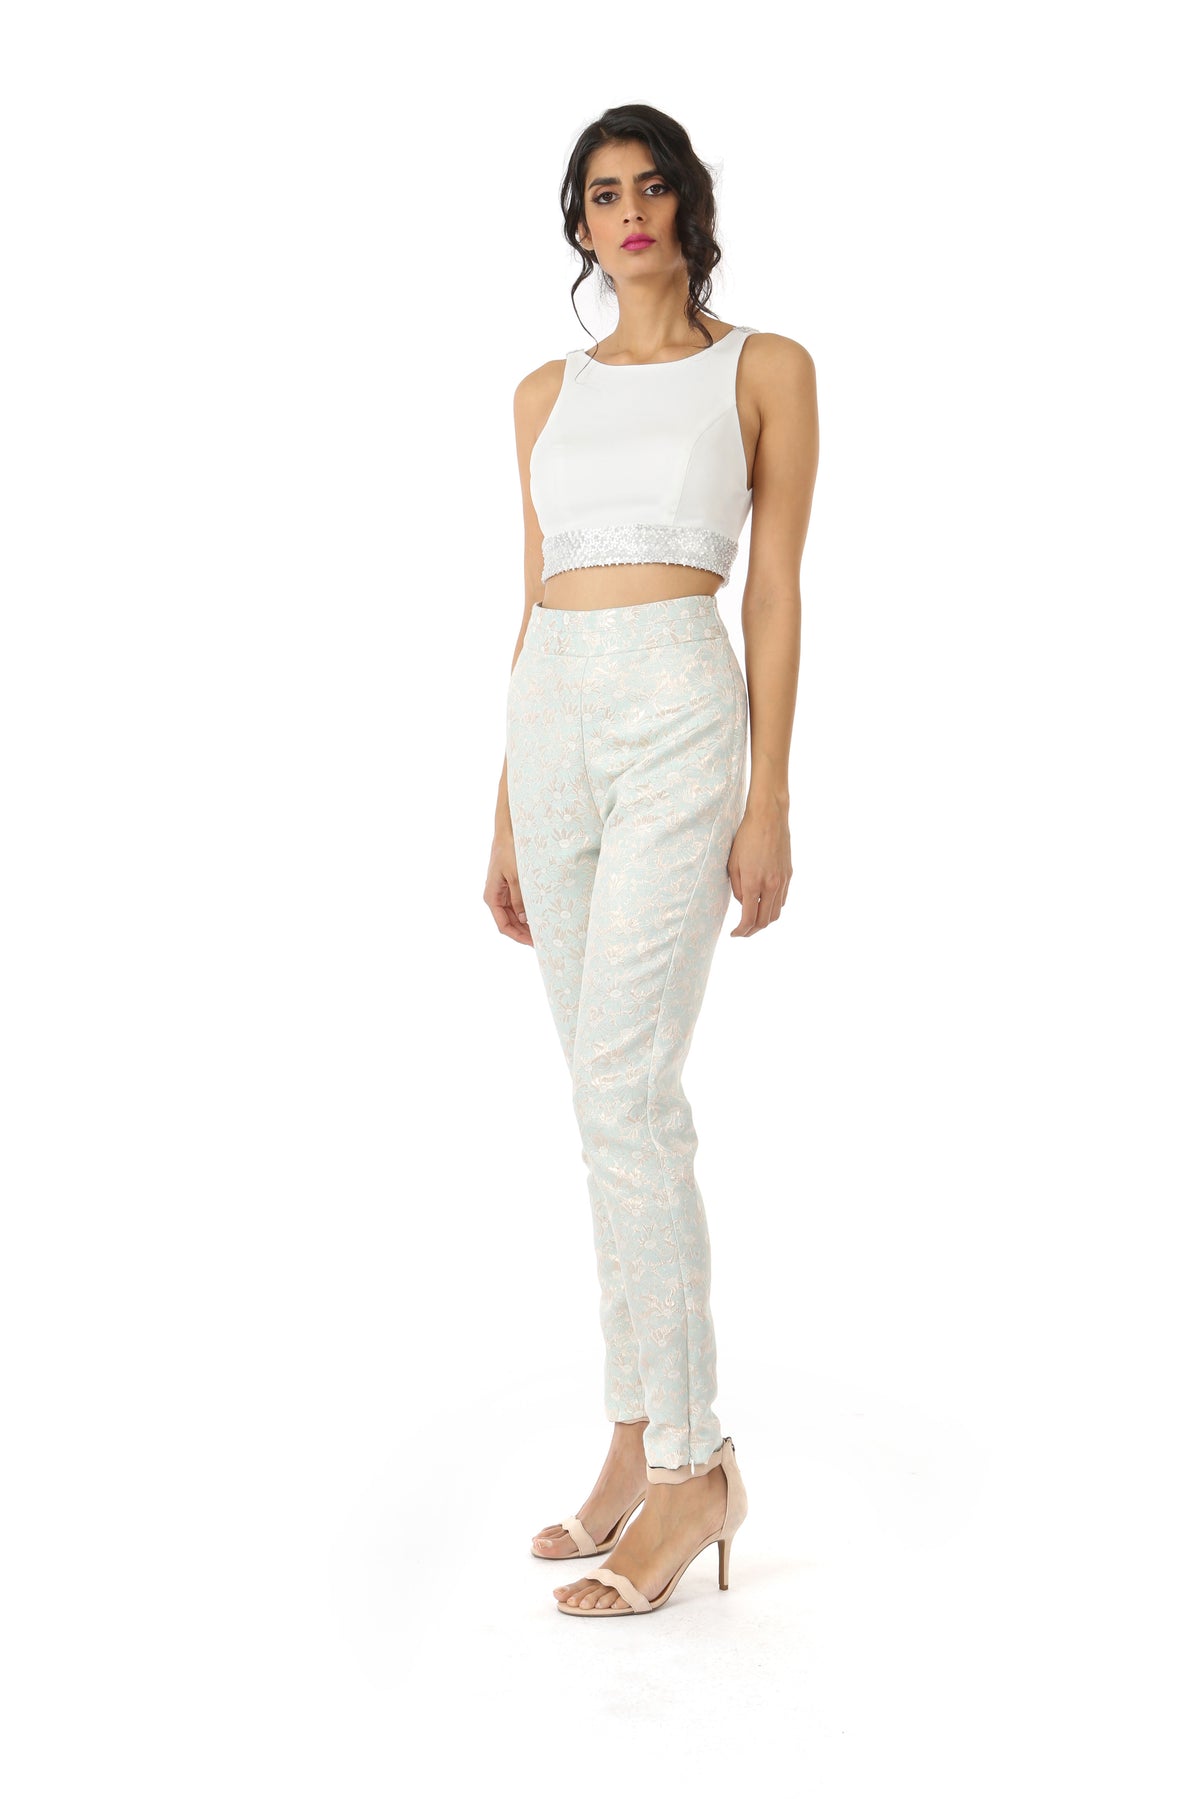 Harleen Kaur Julia Stretch Open Back Top with Floral Sequin Trim - White Front